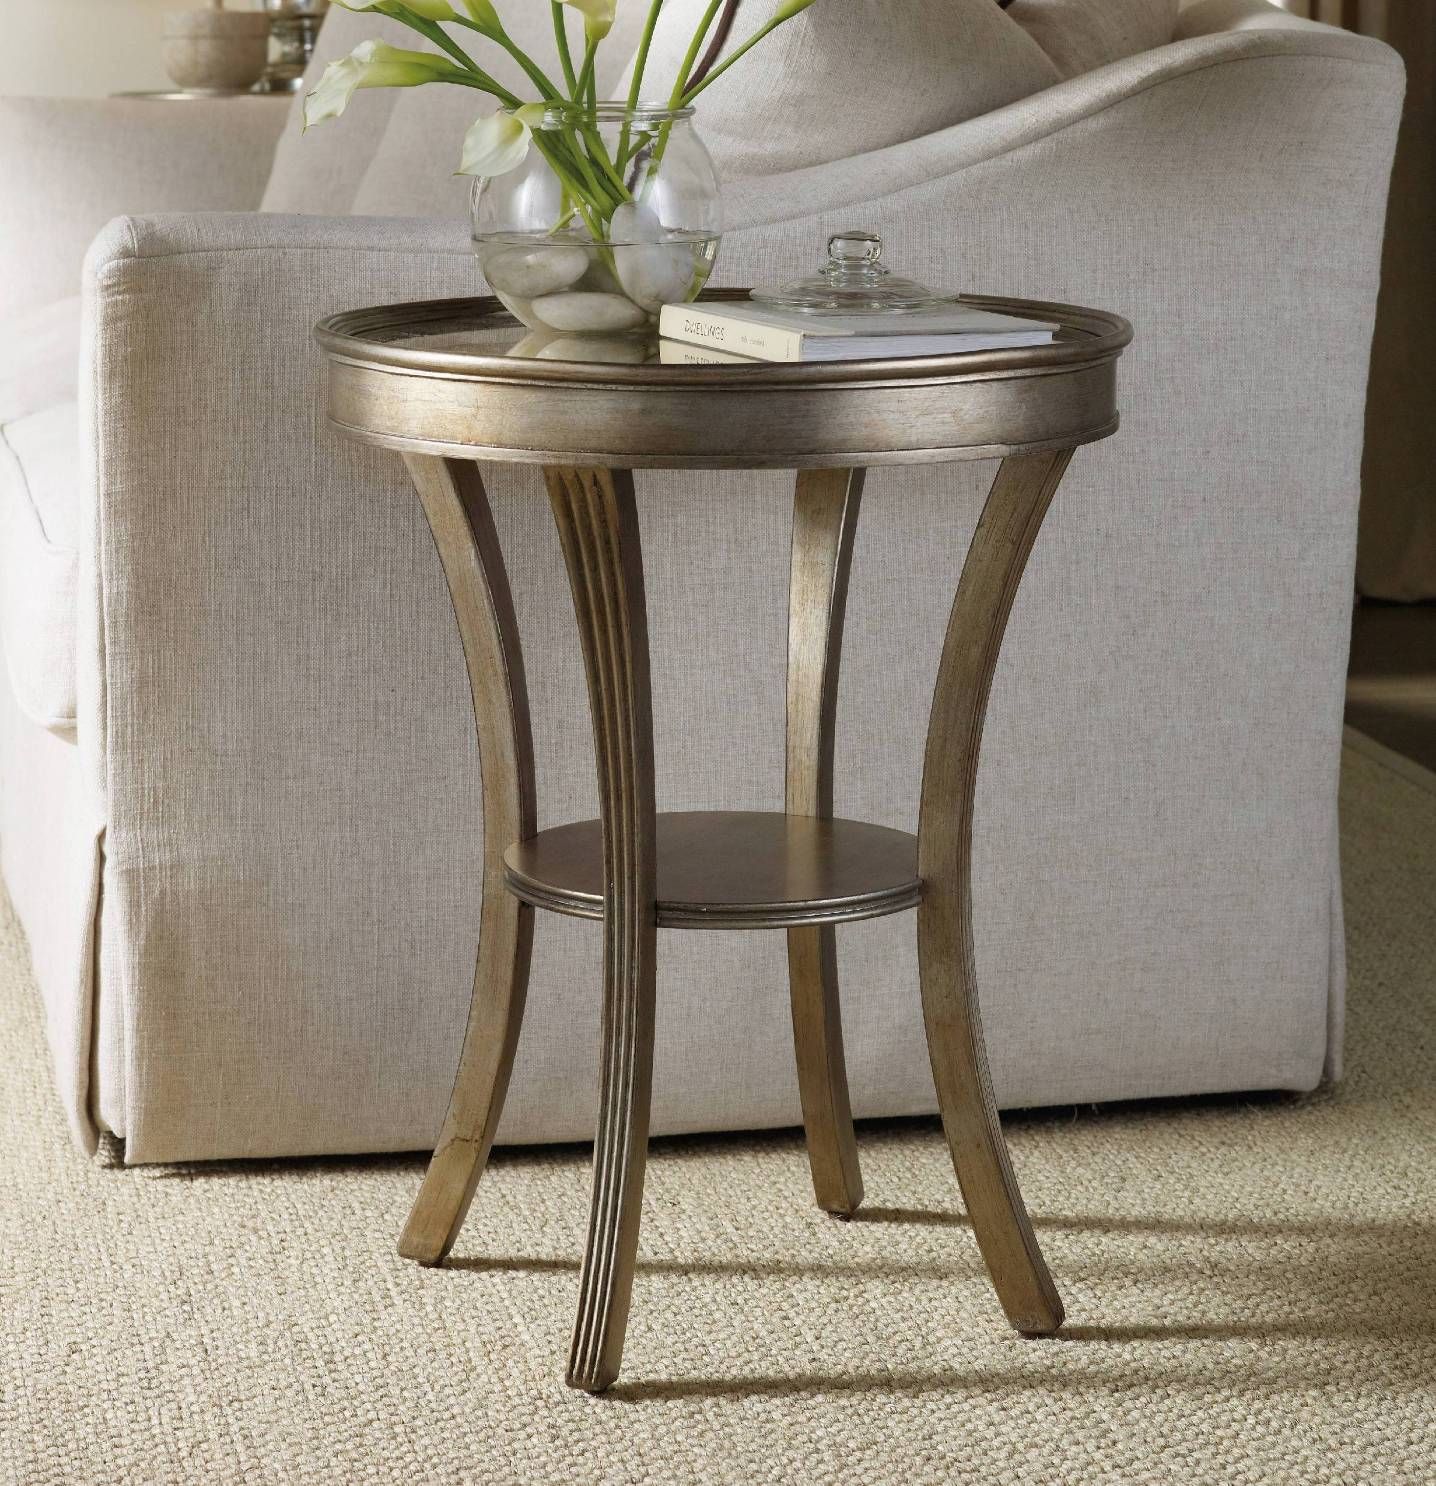 small accent tables stylish touch with benefits for your home furniture frosted glass coffee table side lamps bedroom pier one credit card login west elm marble blue distressed